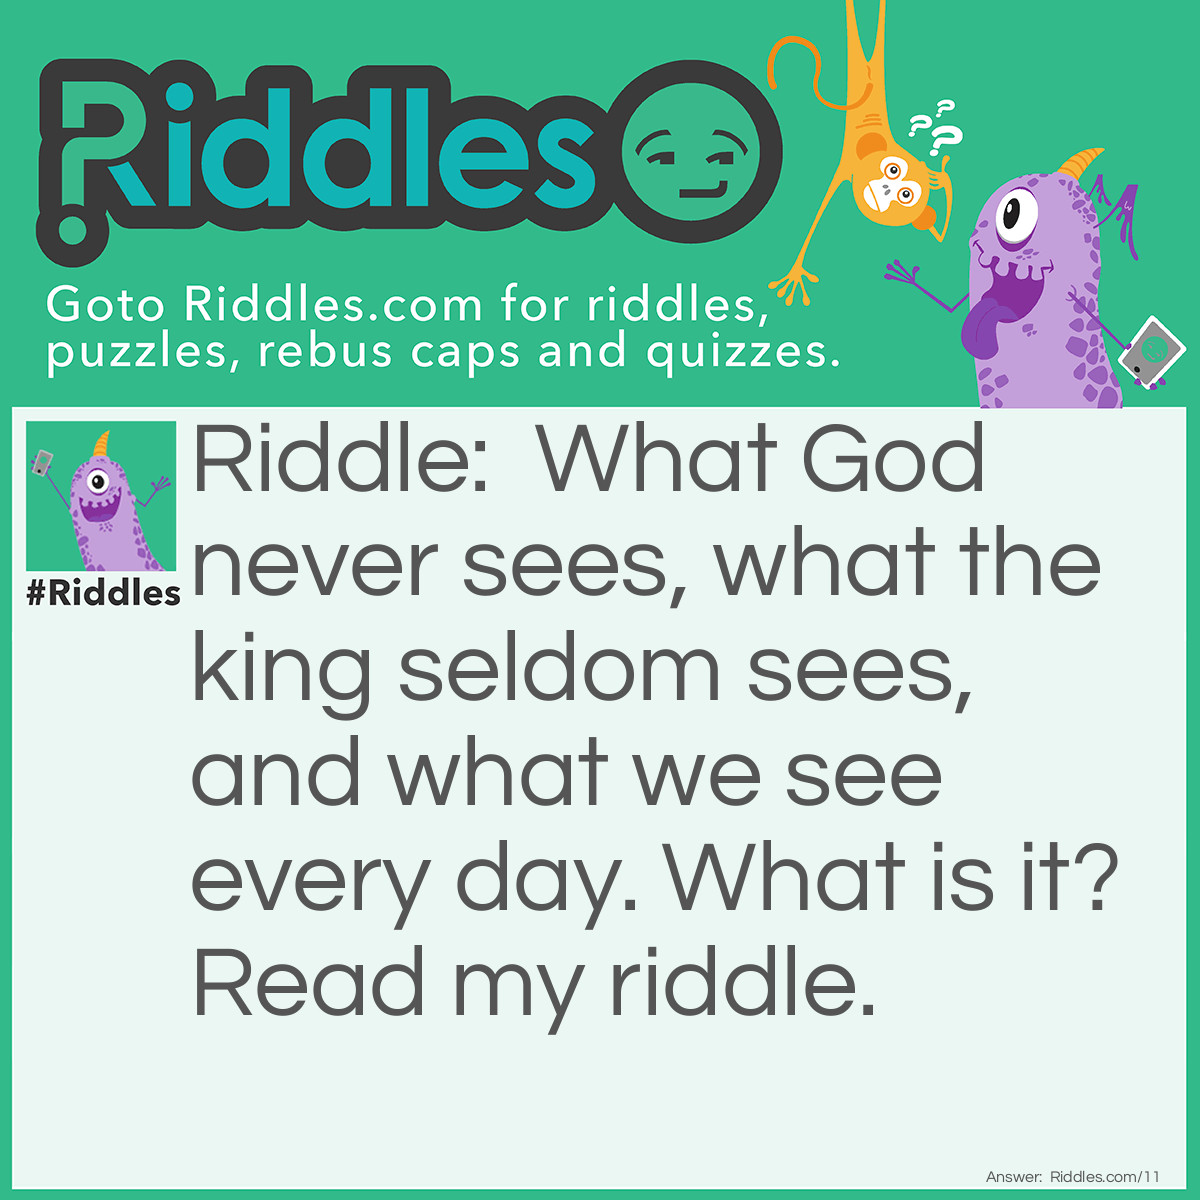 Riddle: Read my riddle, I pray. What God never sees, what the king seldom sees, and what we see every day. What is it? Answer: An equal.